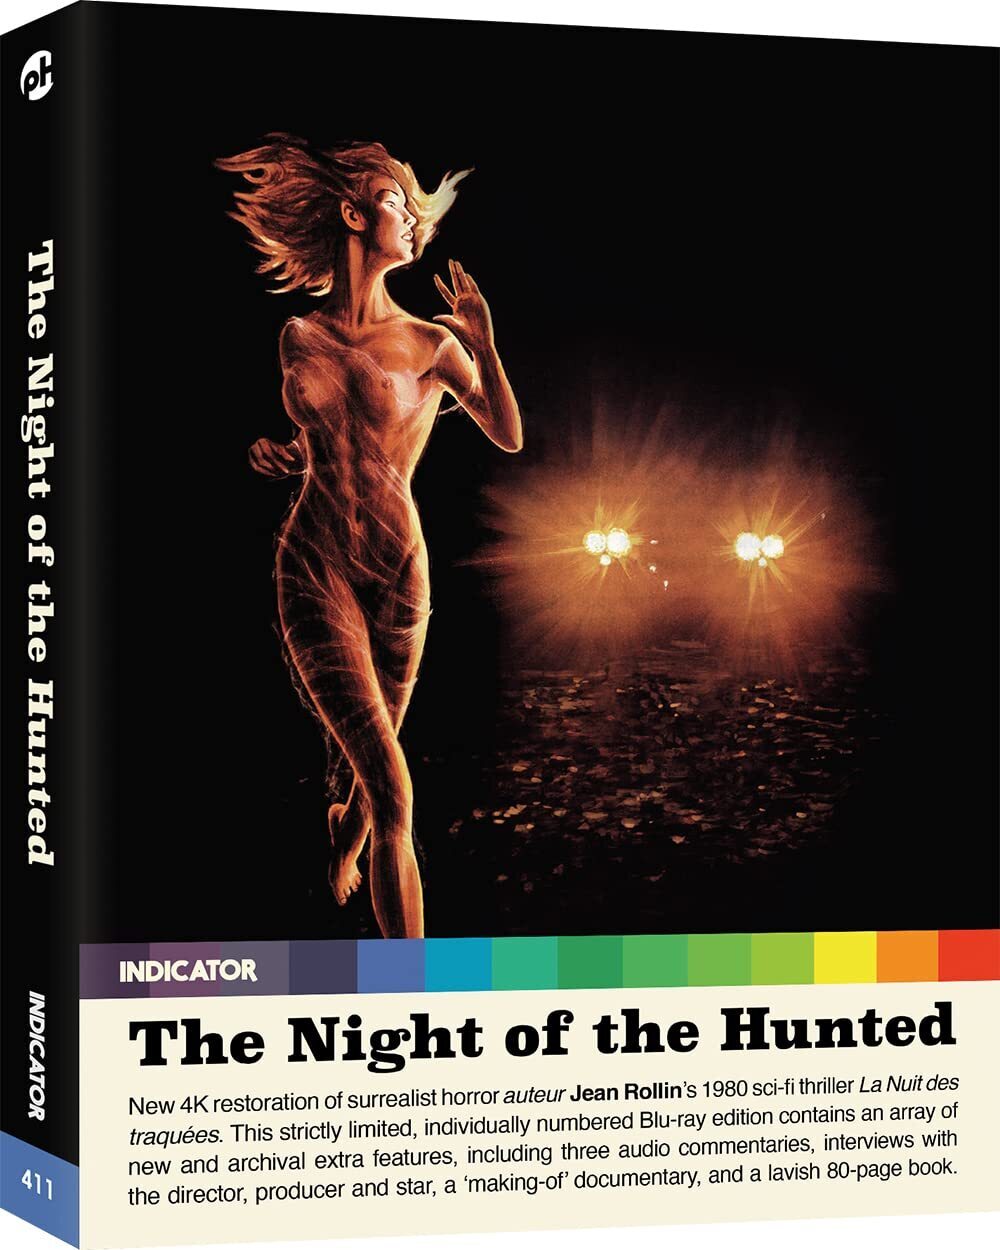 THE NIGHT OF THE HUNTED (LIMITED EDITION) BLU-RAY